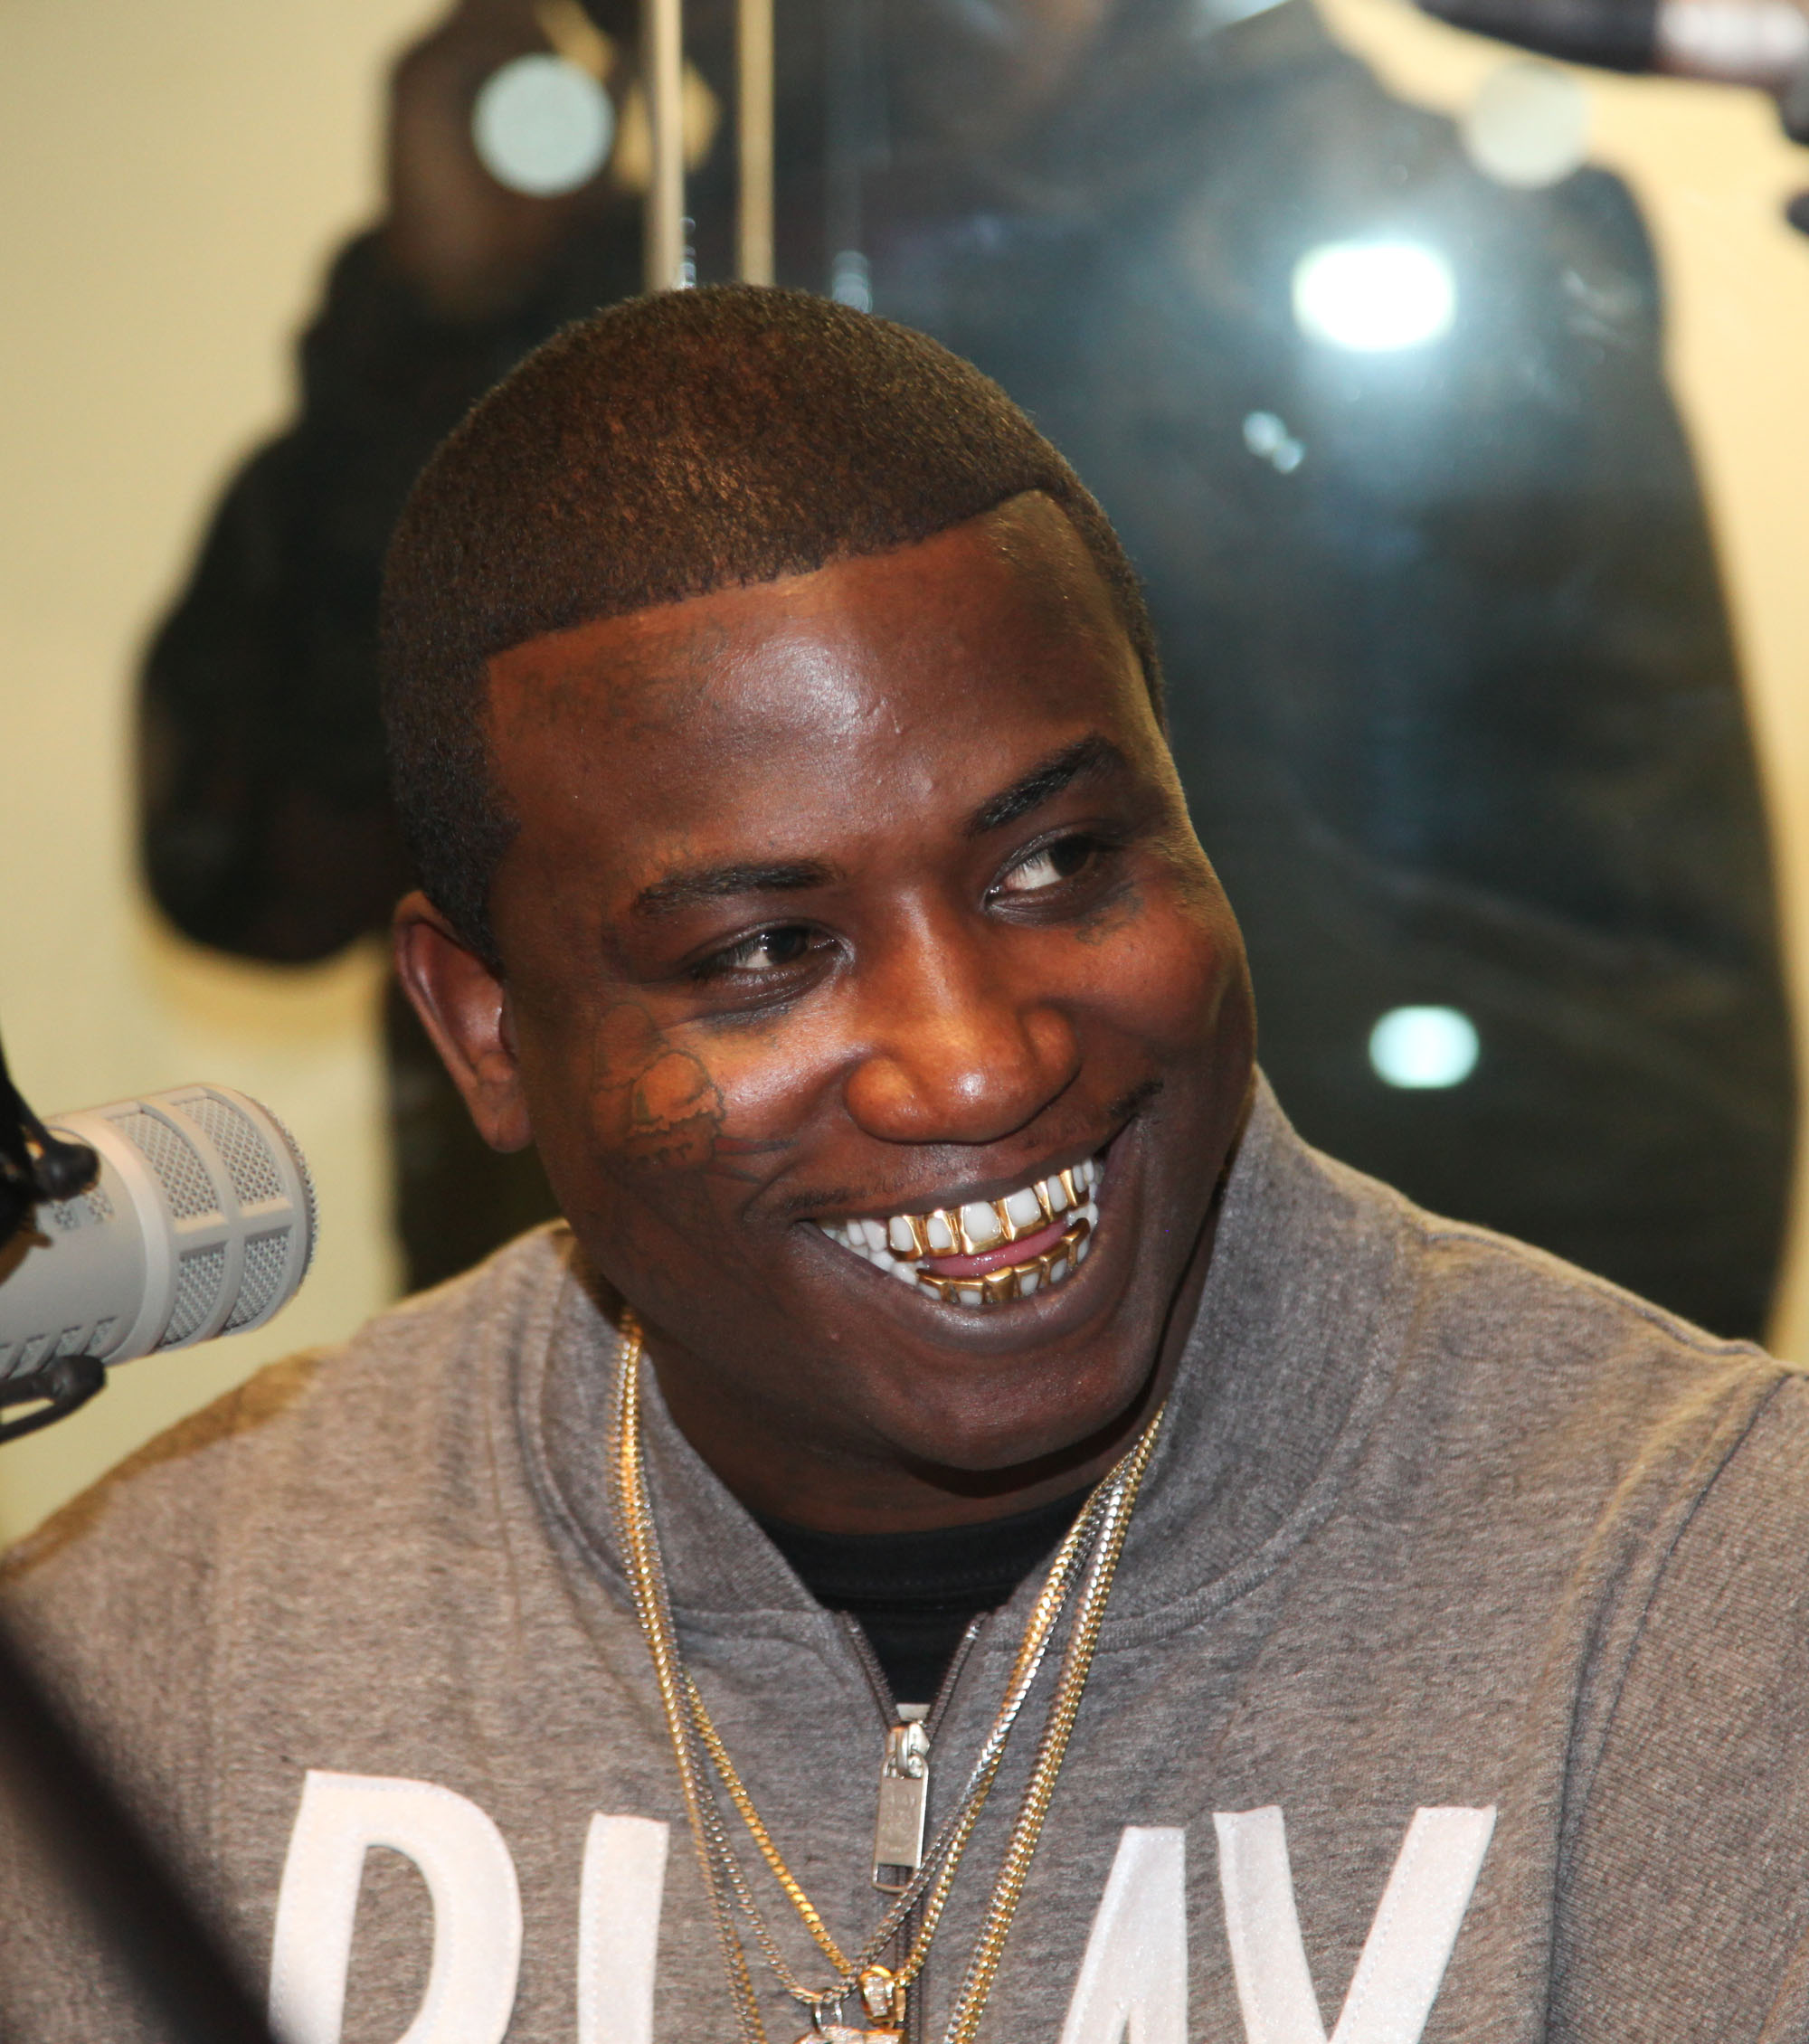 You Can Now Download EVERY Gucci Mixtape EVER! | You Can Now Download ...